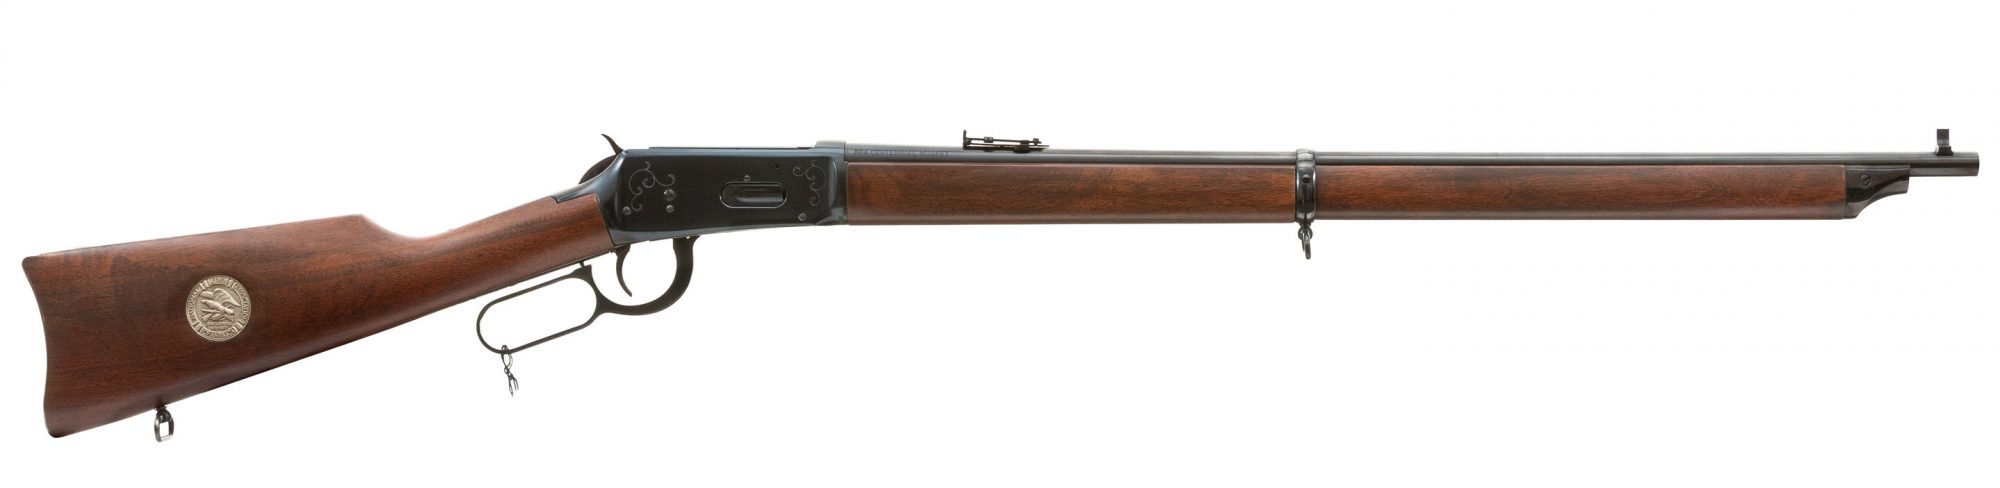 Photo of a Winchester Model 94 NRA Centennial Musket, for sale by Turnbull Restoration of Bloomfield, NY